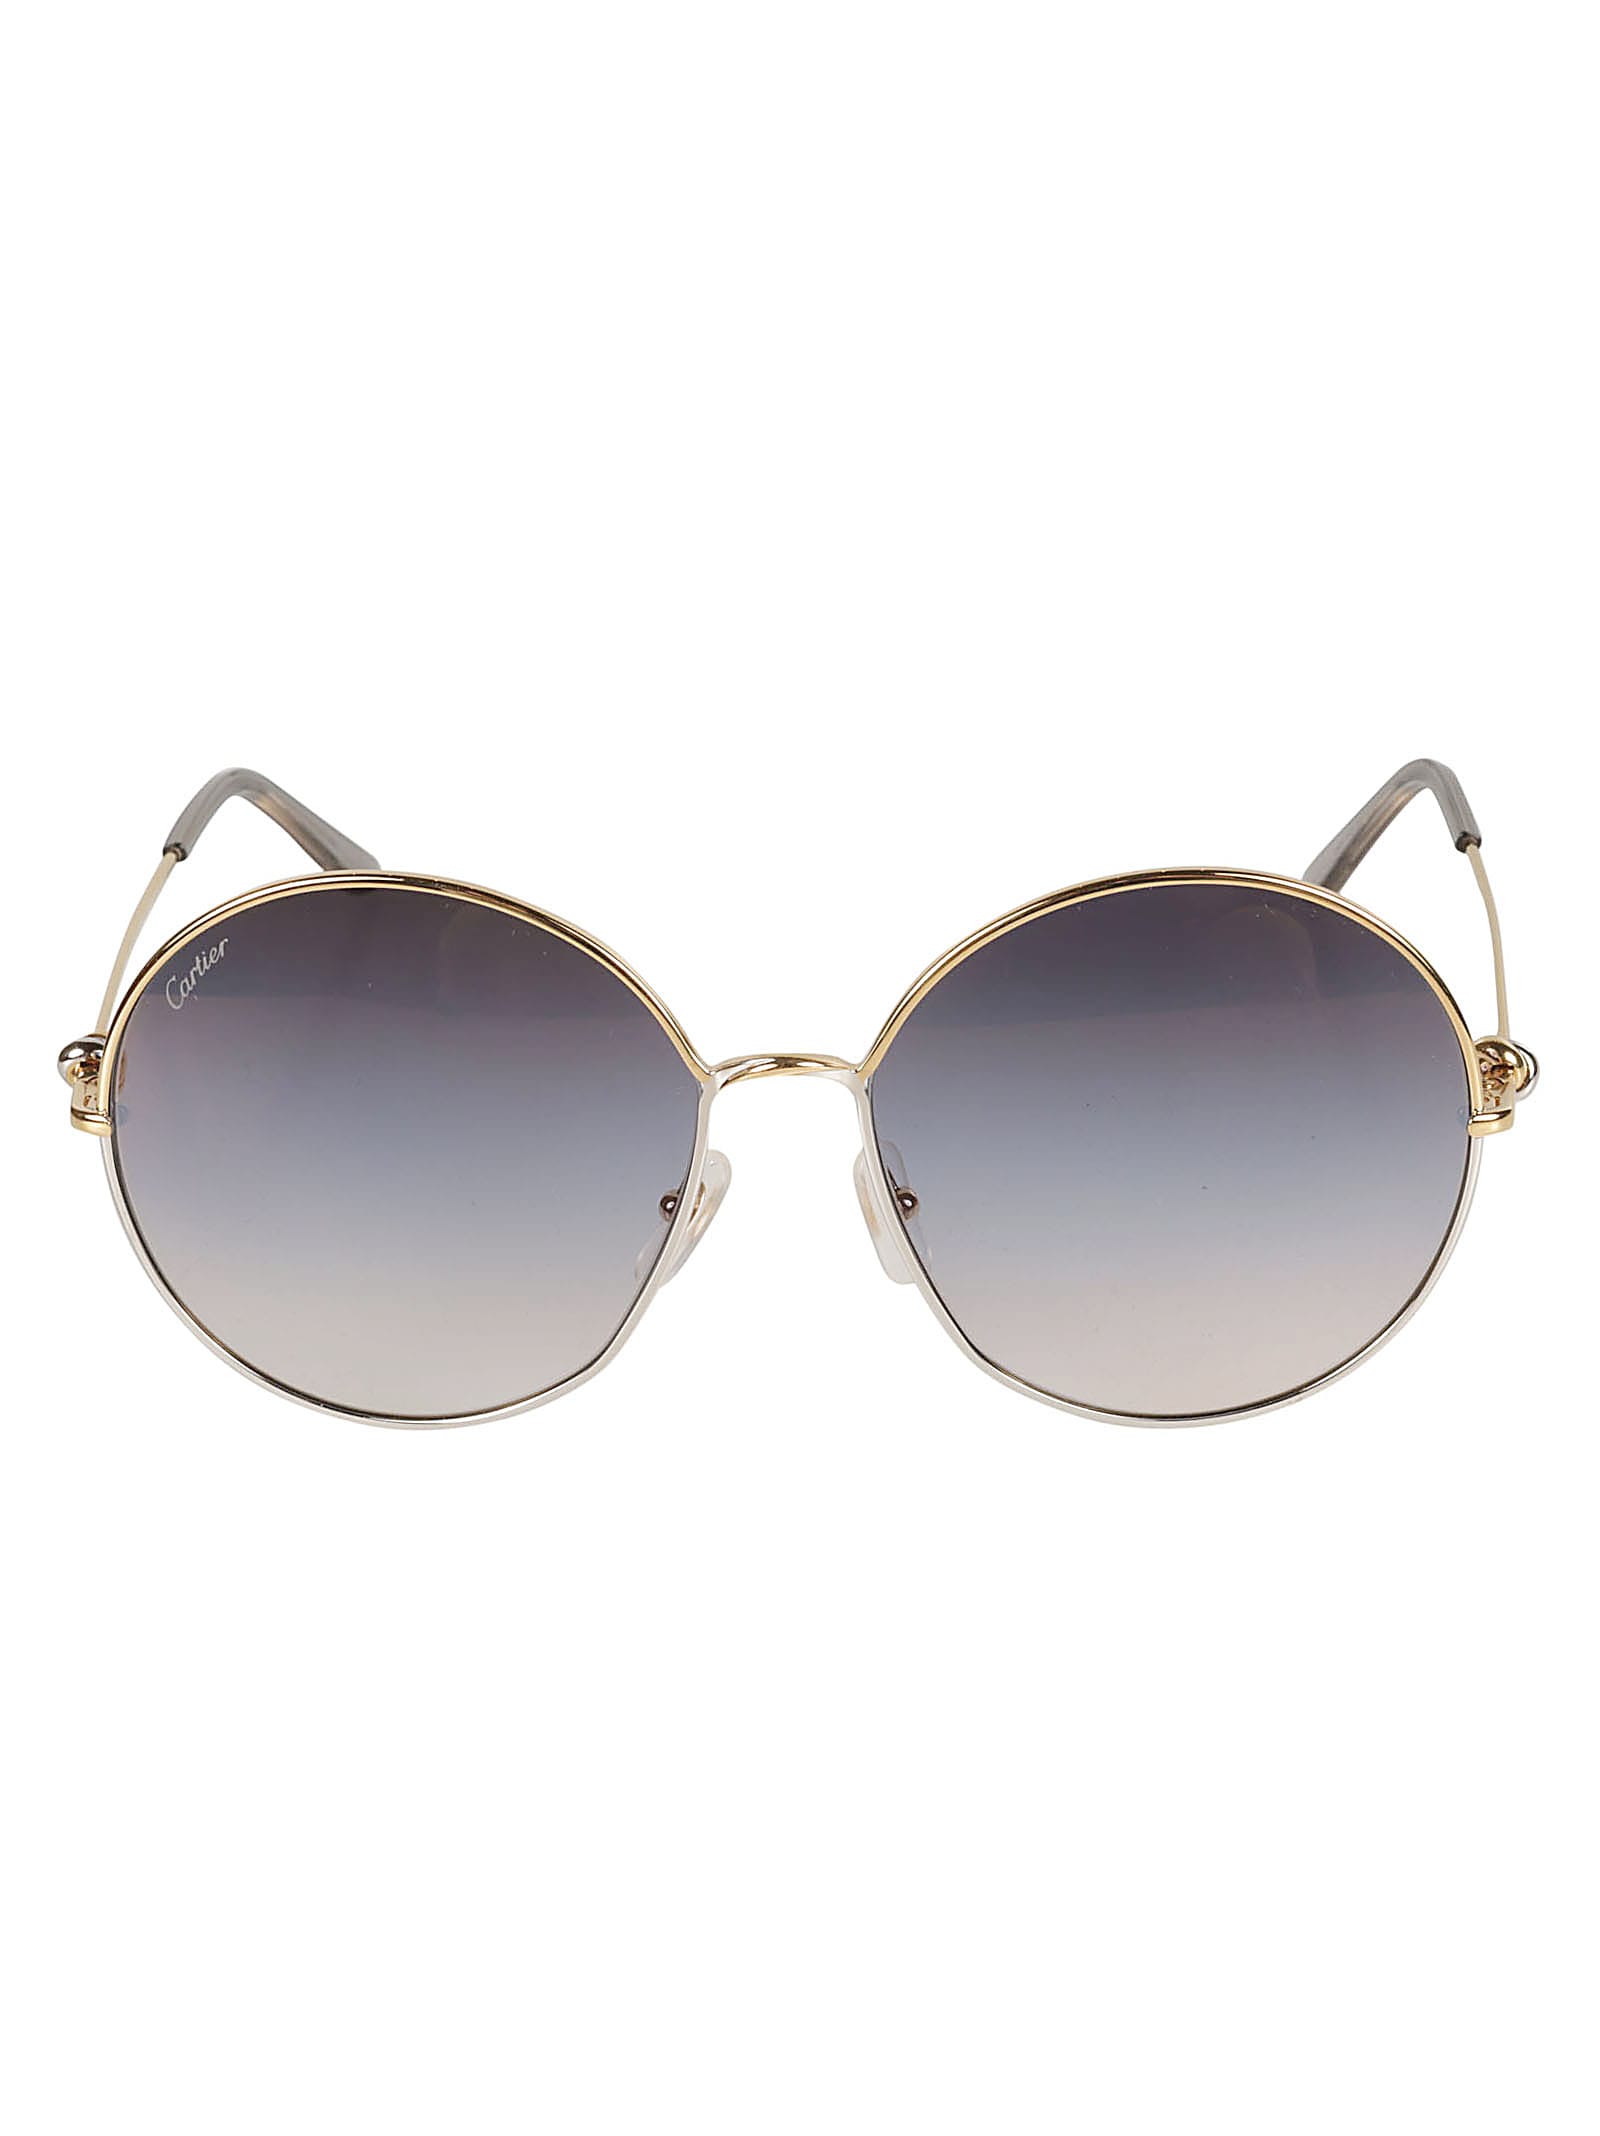 Cartier Round Frame Sunglasses In Gold/grey